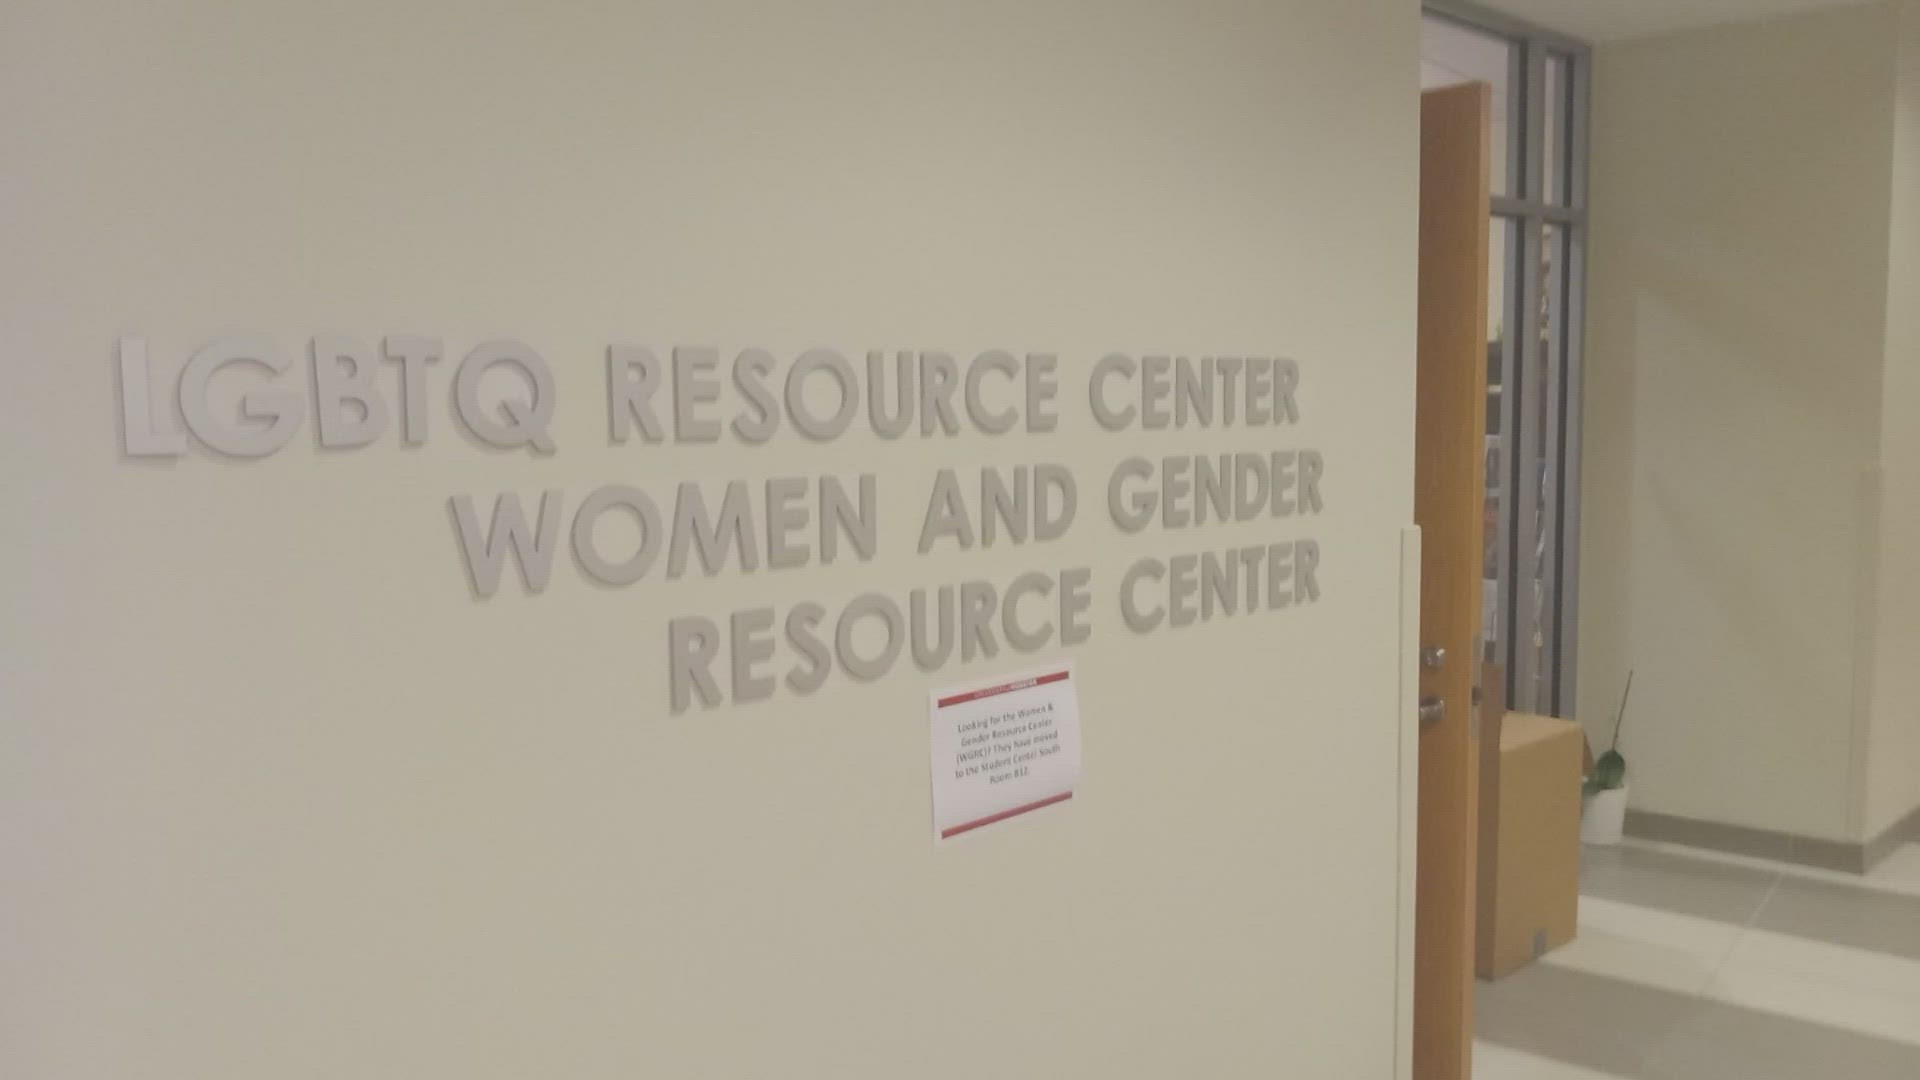 This comes as a photo of a sign making the rounds on social media claiming UH’s LGBTQ Resource Center has been disbanded.